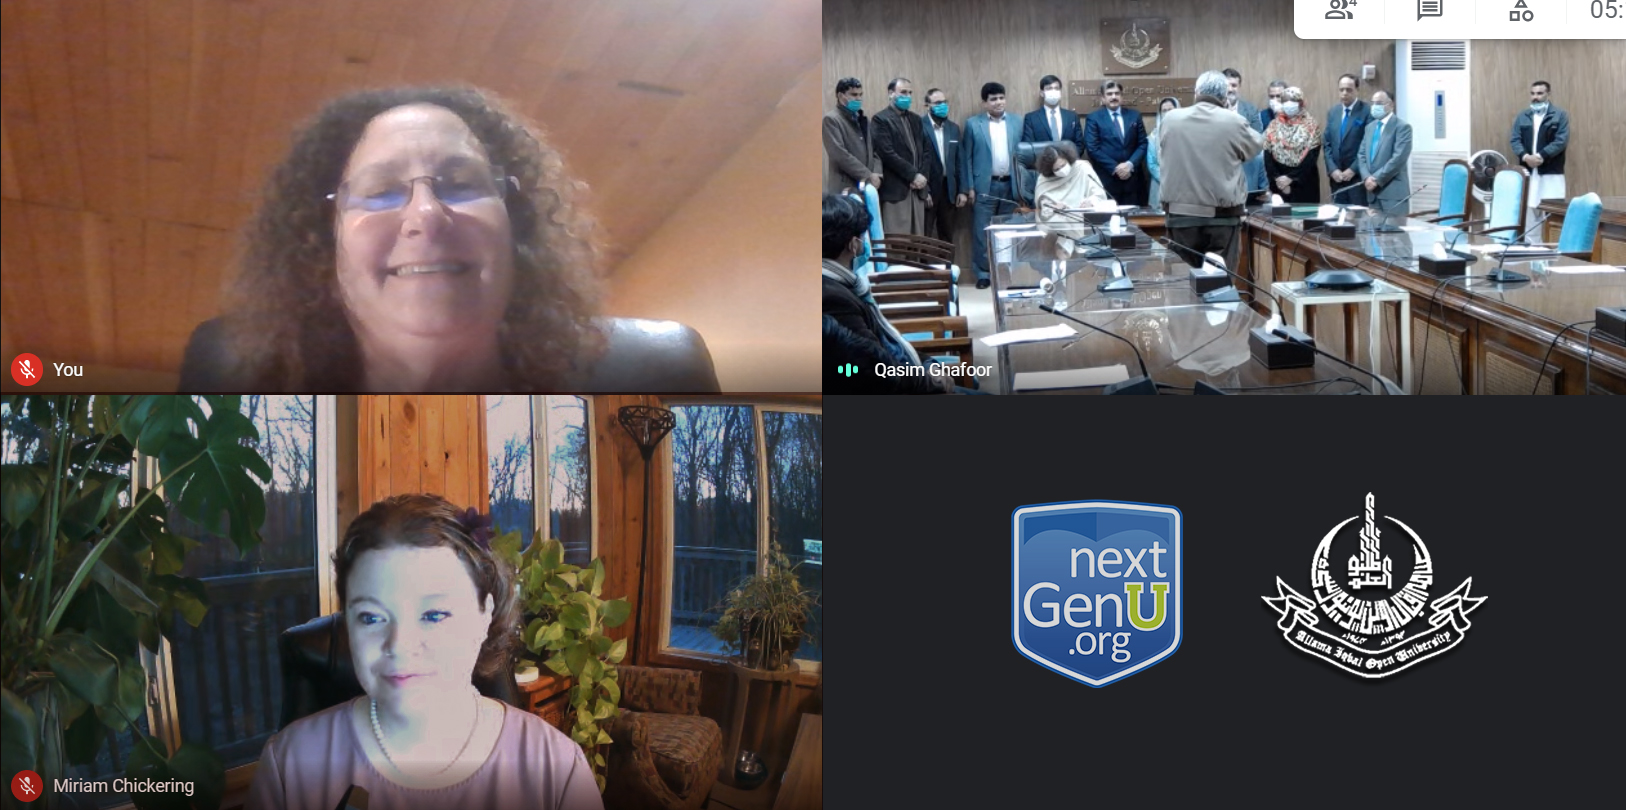 NextGenU.org Founder, Dr. Erica Frank, and Chief Executive Officer, Miriam Chickering, virtually attend NextGenU.org's, NHSD's, and Allama Iqbal Open University’s signing ceremony